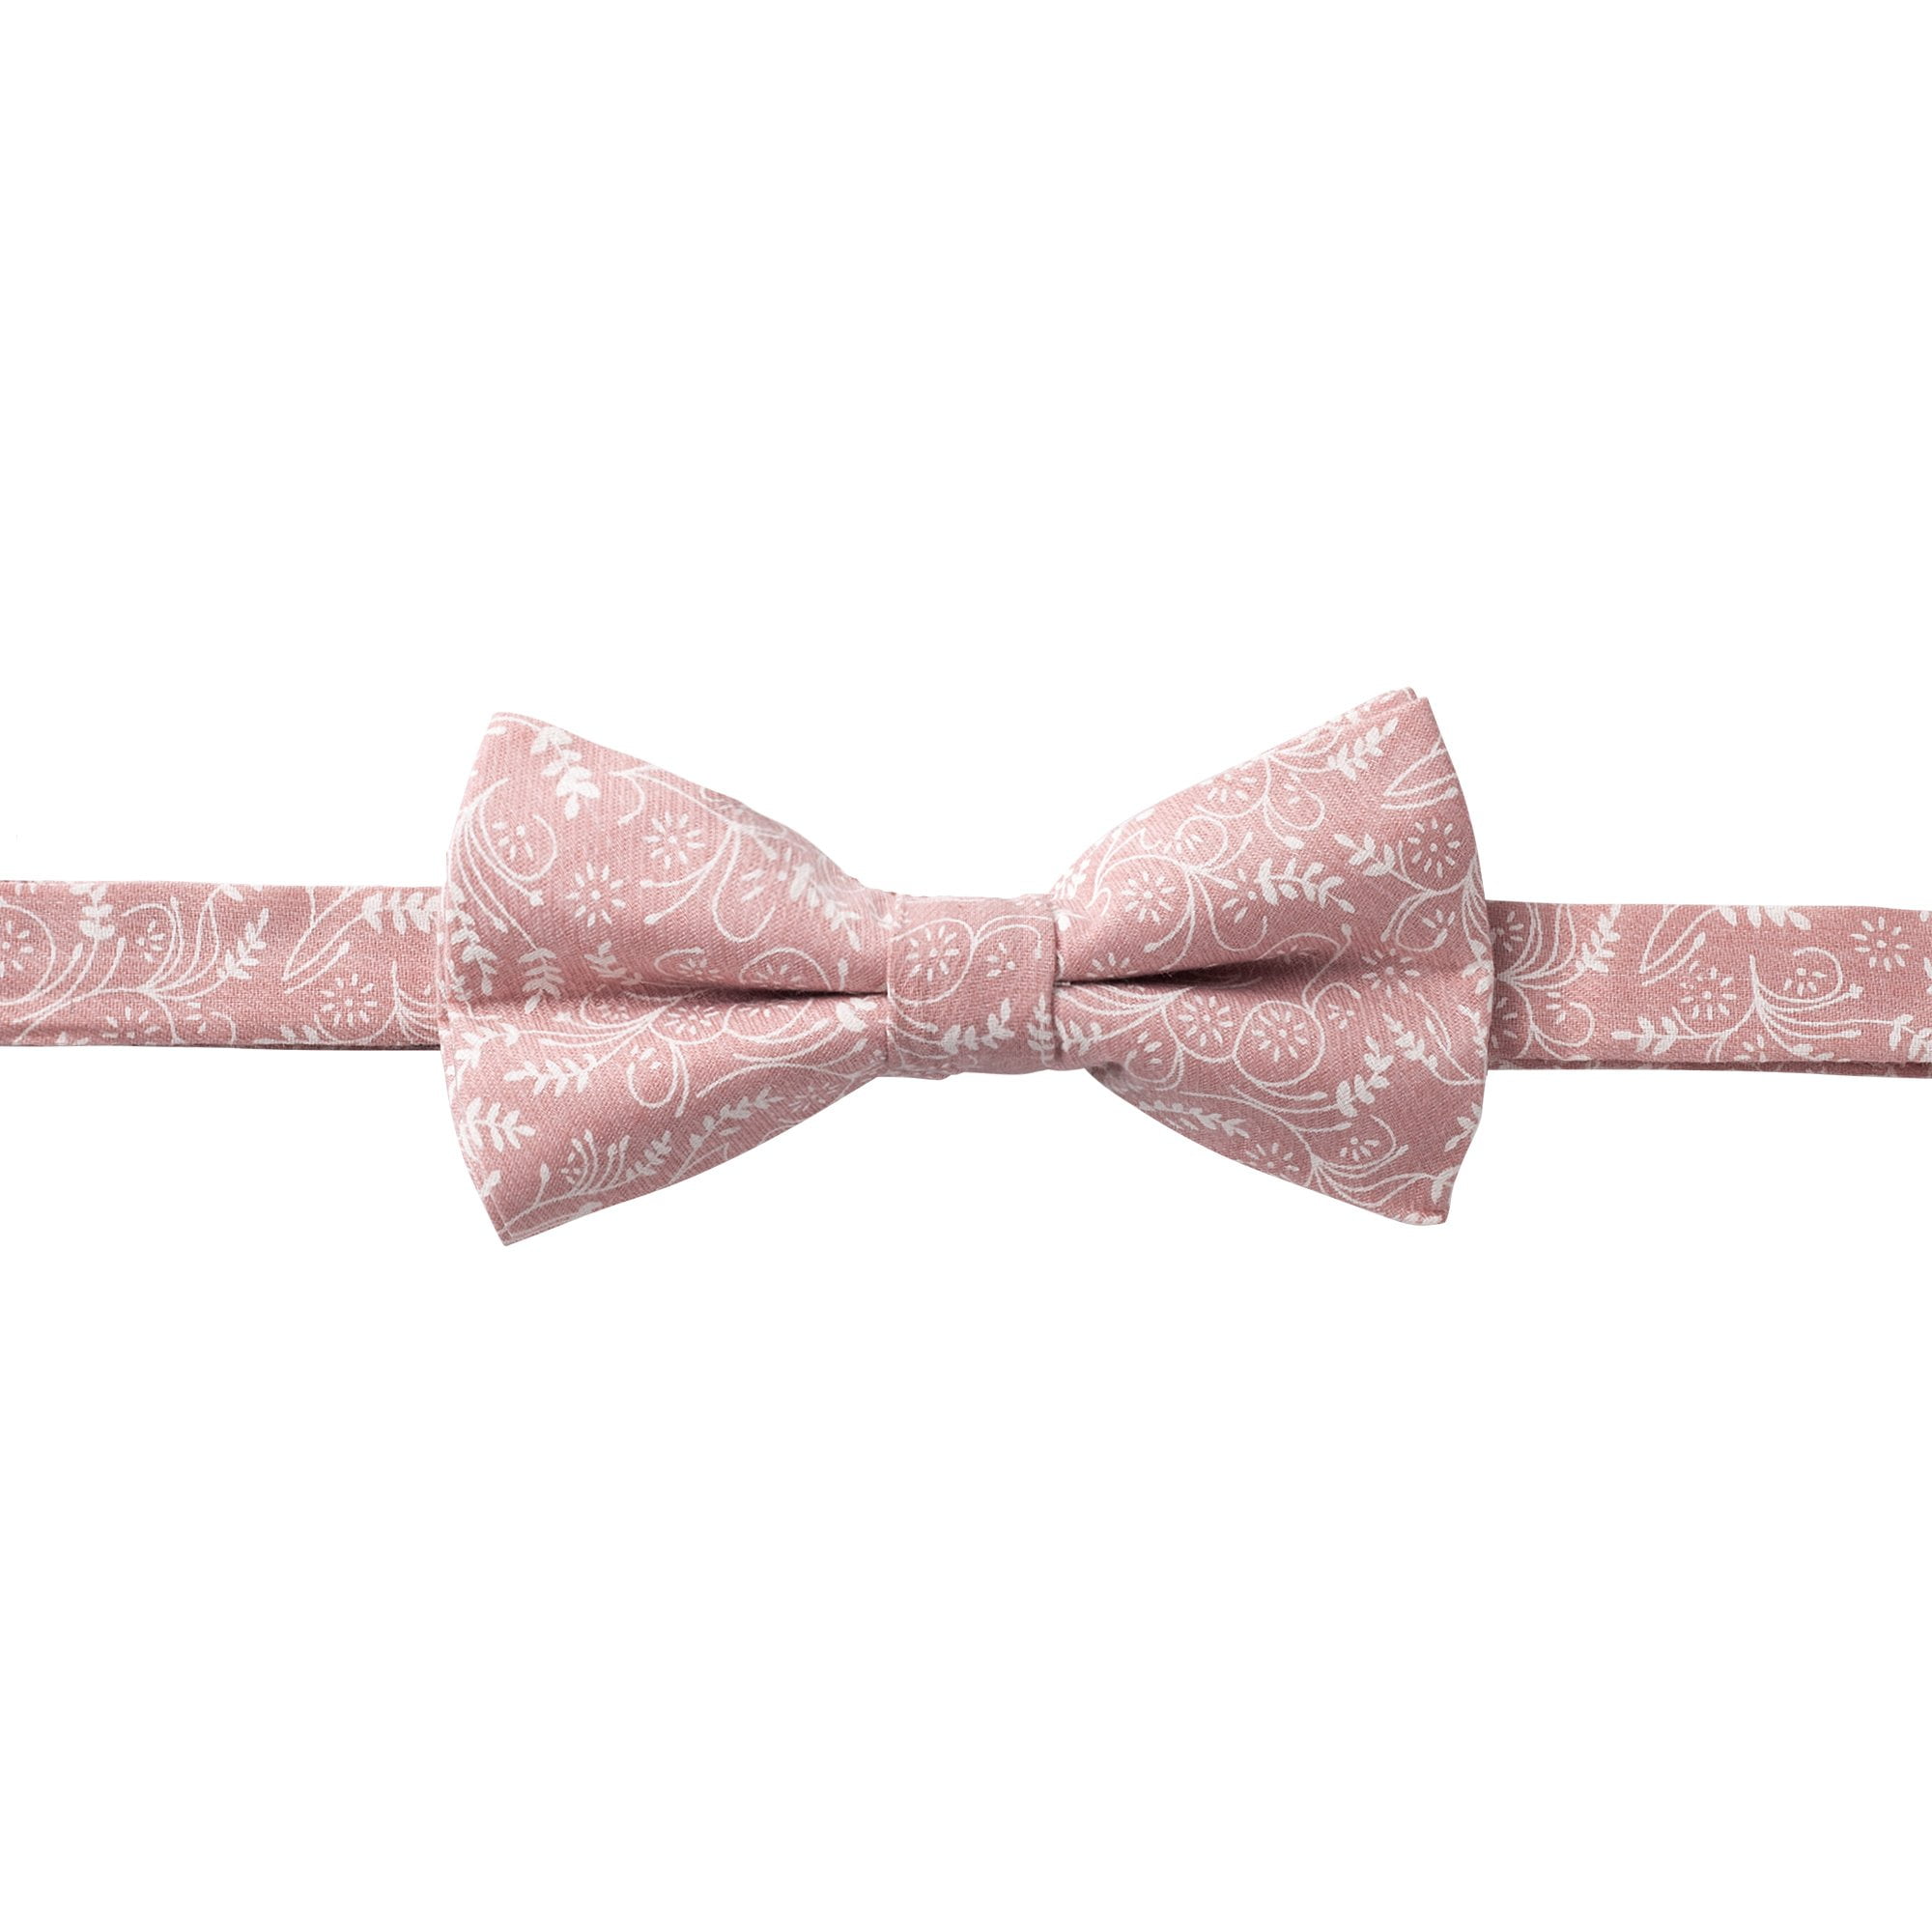 Dusty Pink Floral BV49 Pre-Tied Premium Quality Bow Tie Cotton 